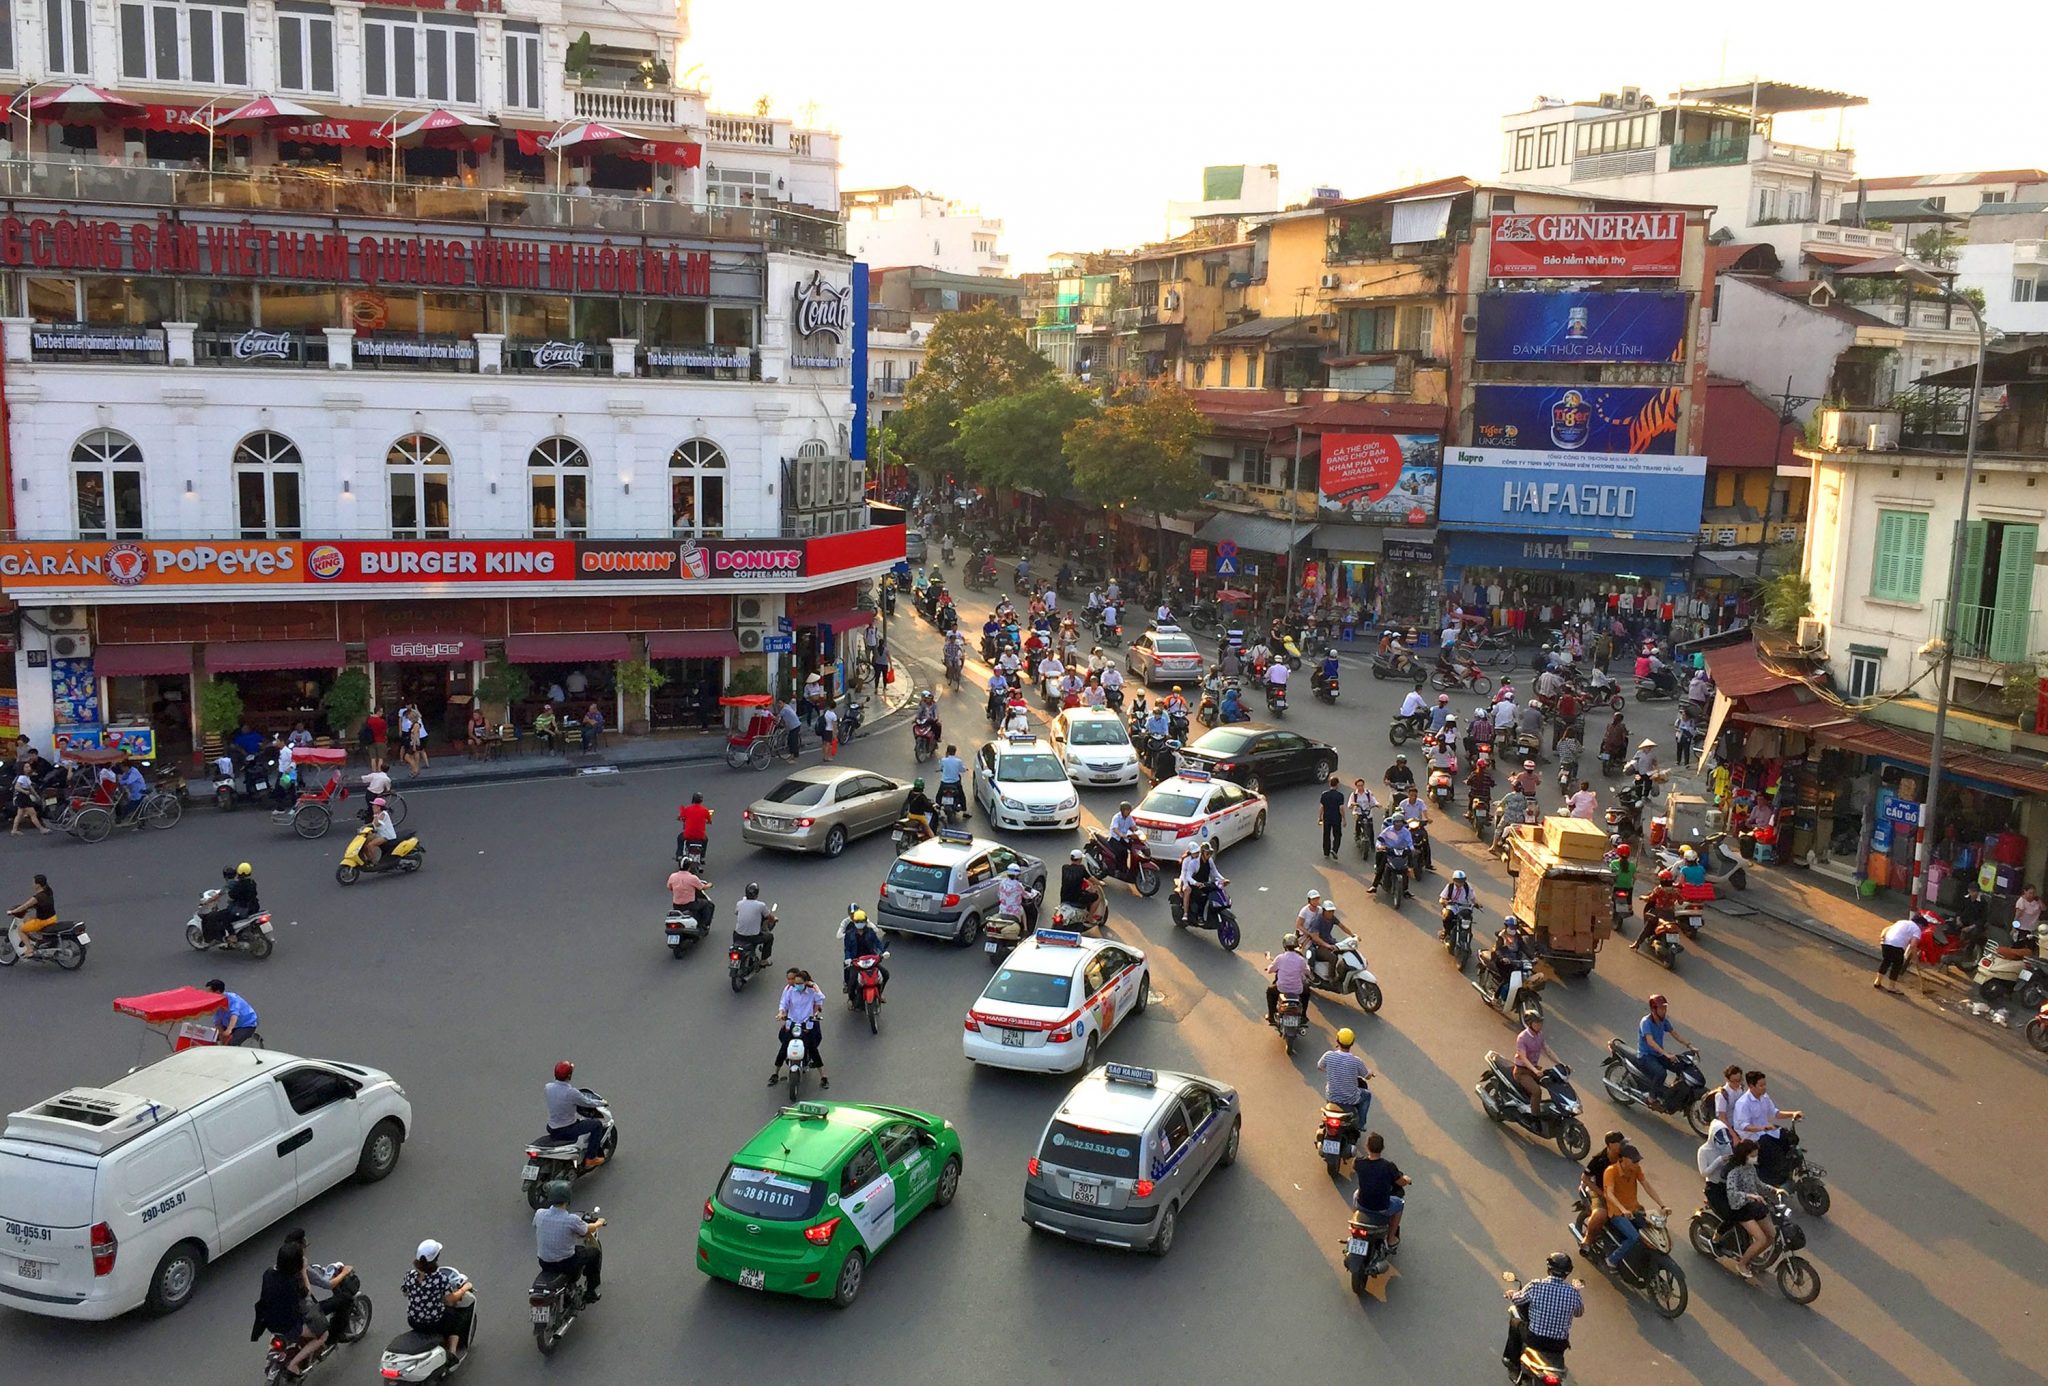 Hanoi Travel Tips: 18 Things To Know Before Visiting Hanoi